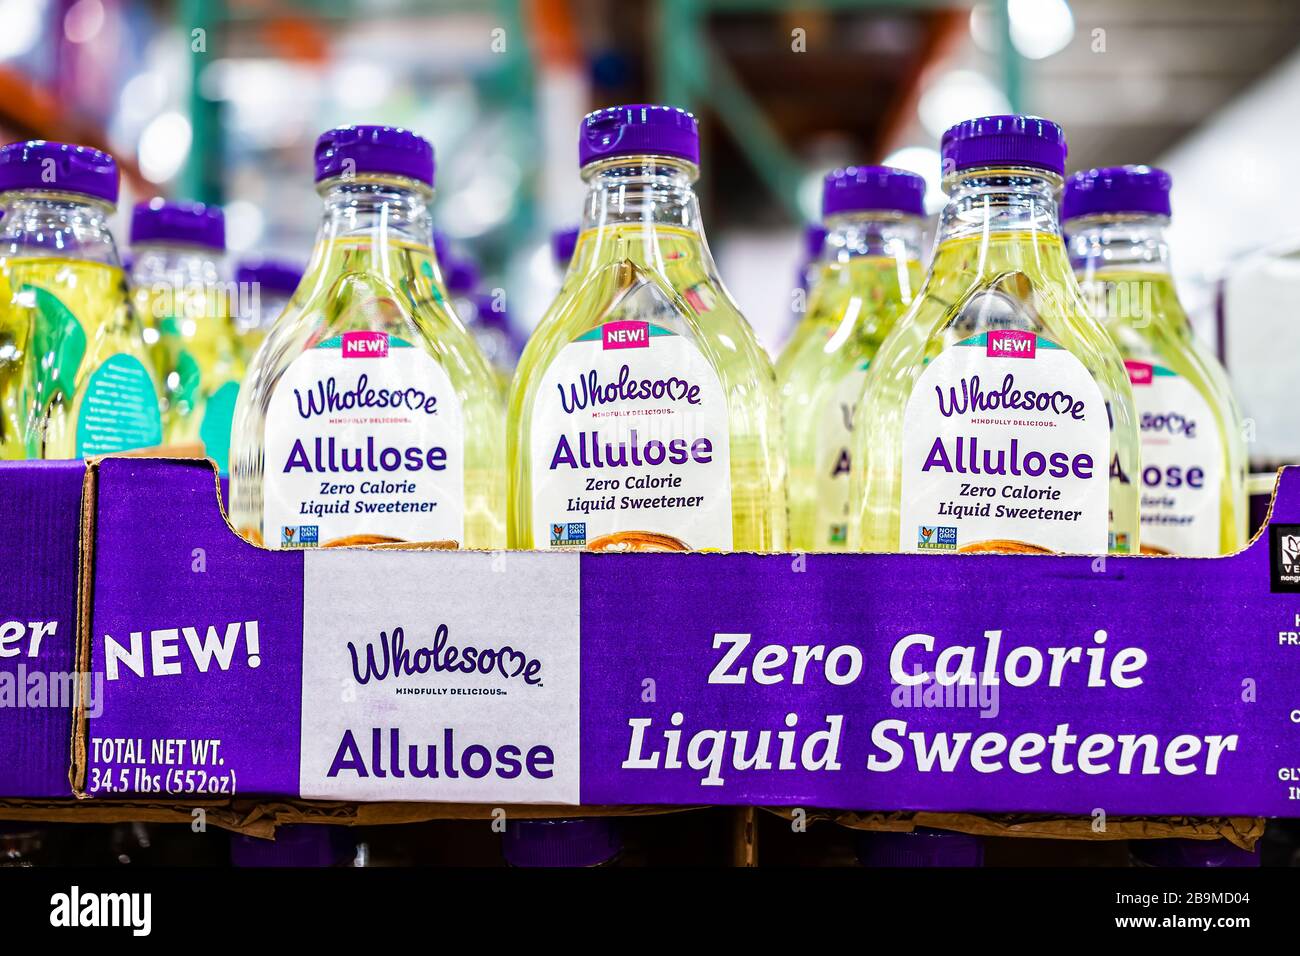 Sterling, USA - March 23, 2020: Costco store shop with sign dor Allulose sugar free sweetener by Wholesome company as substitute Stock Photo